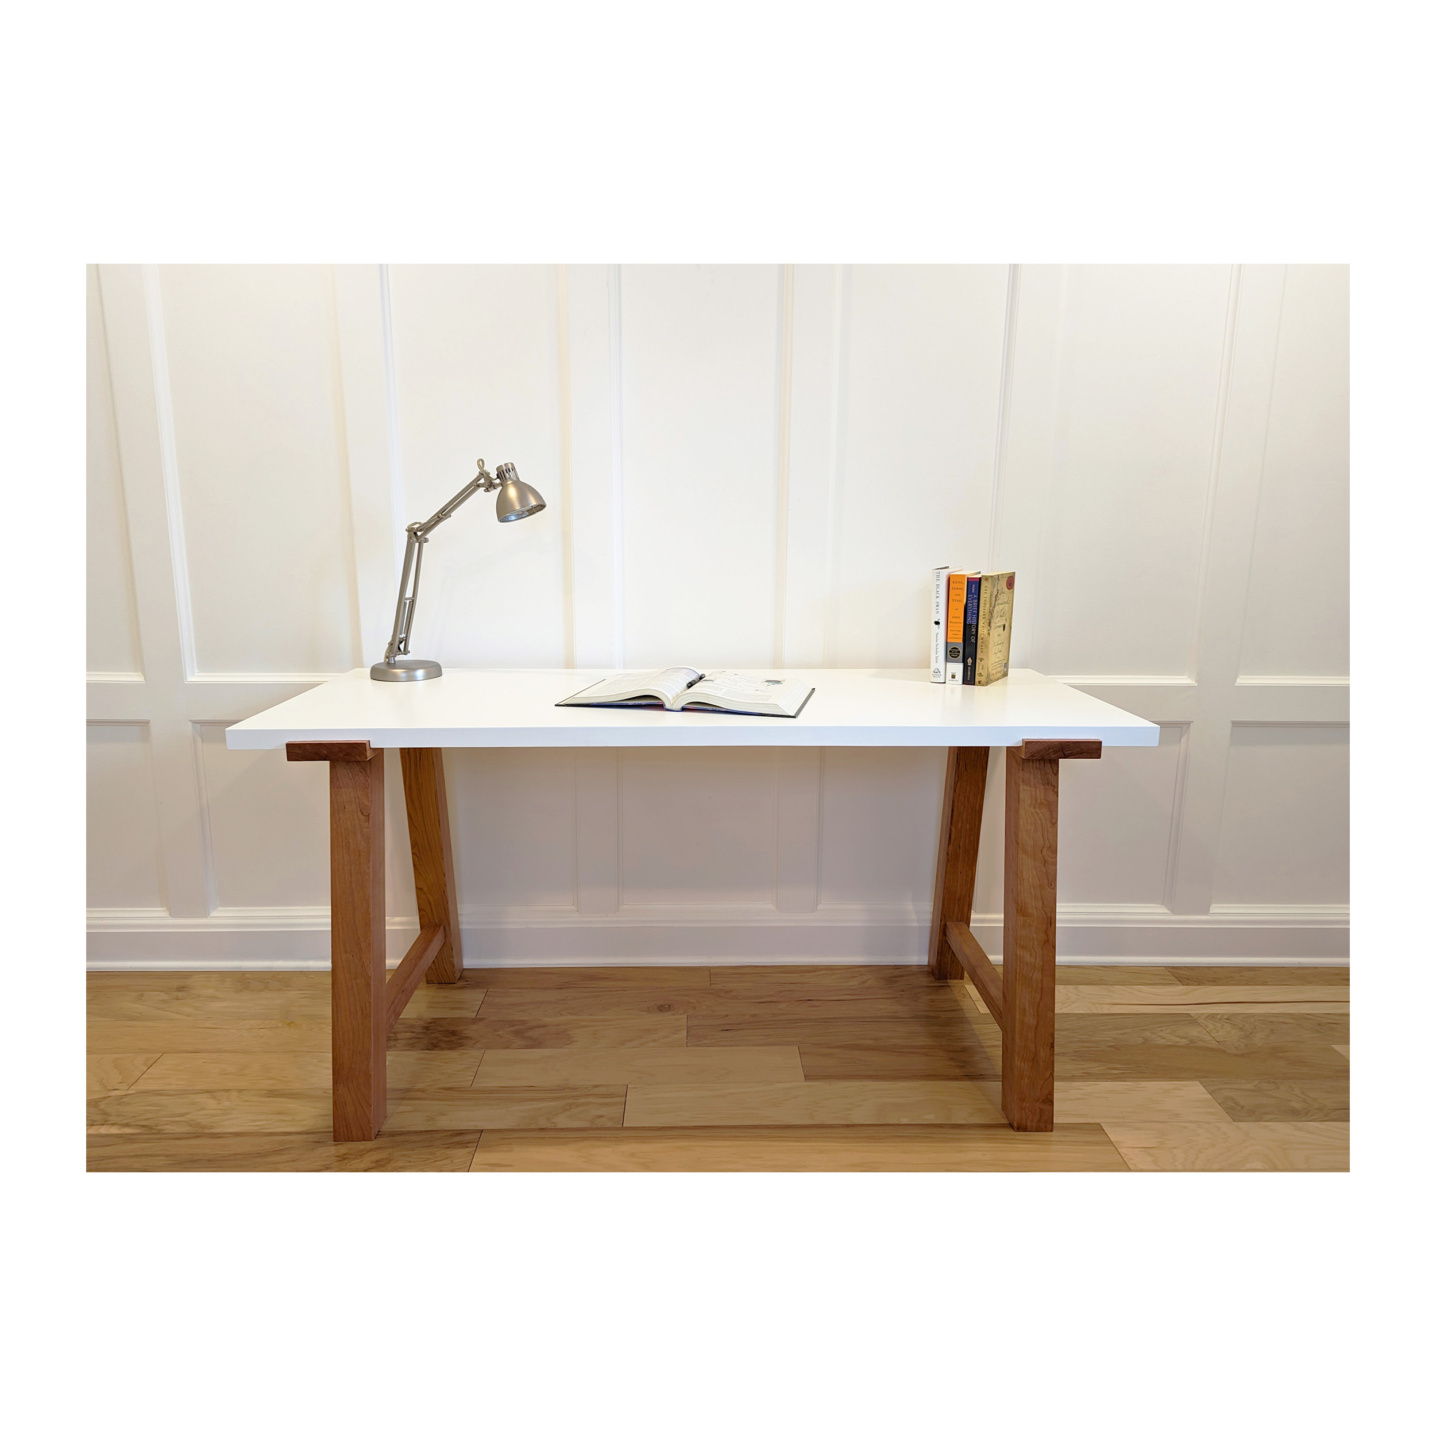 Wood desk made domestically with locally grown hardwoods